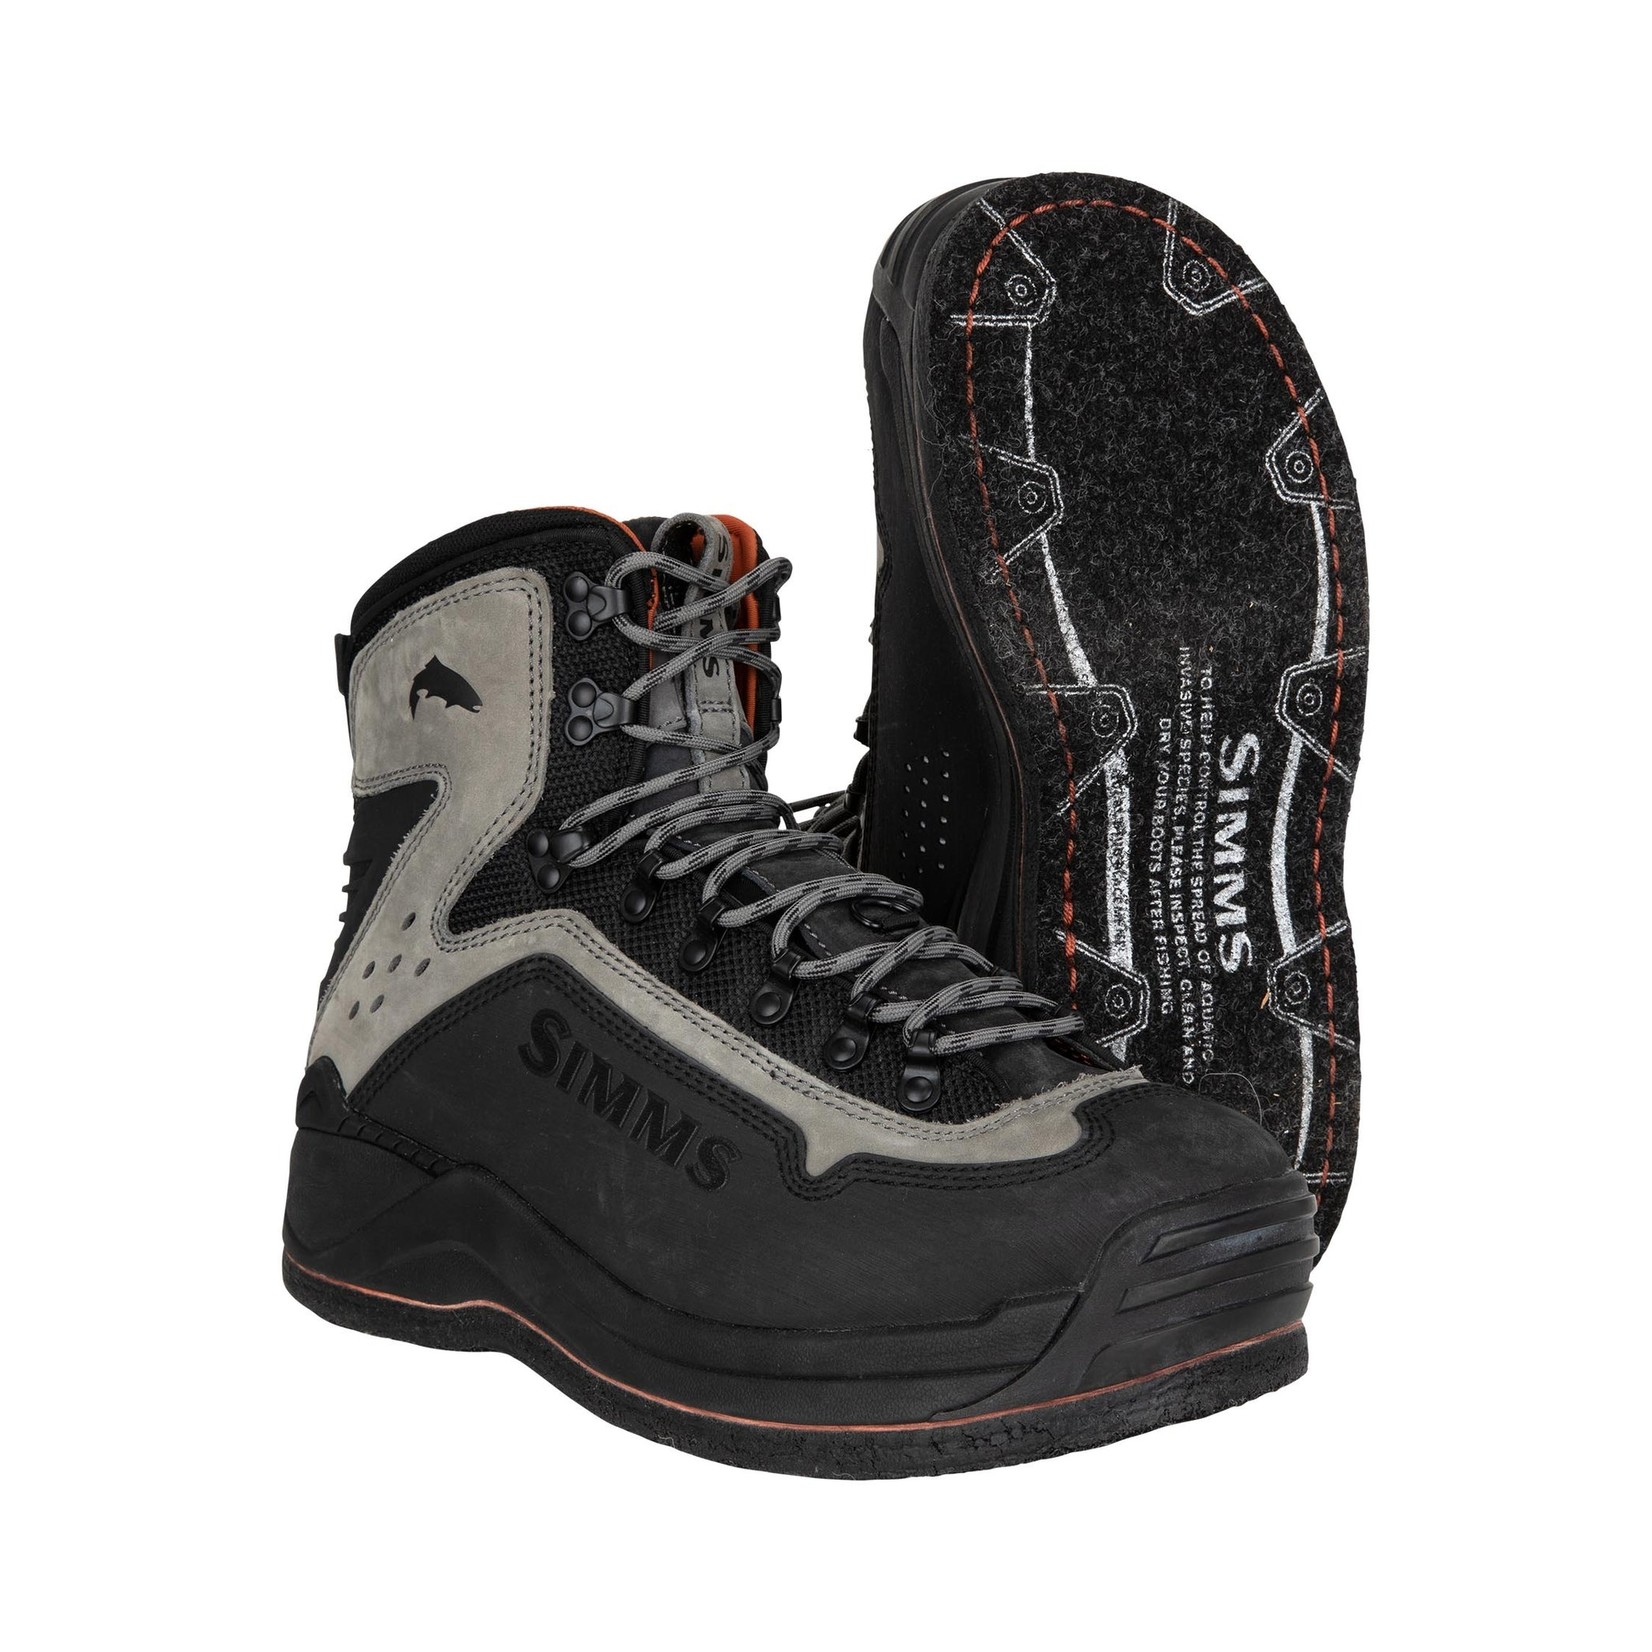 M's G3 Guide Wading Boots - Felt Soles